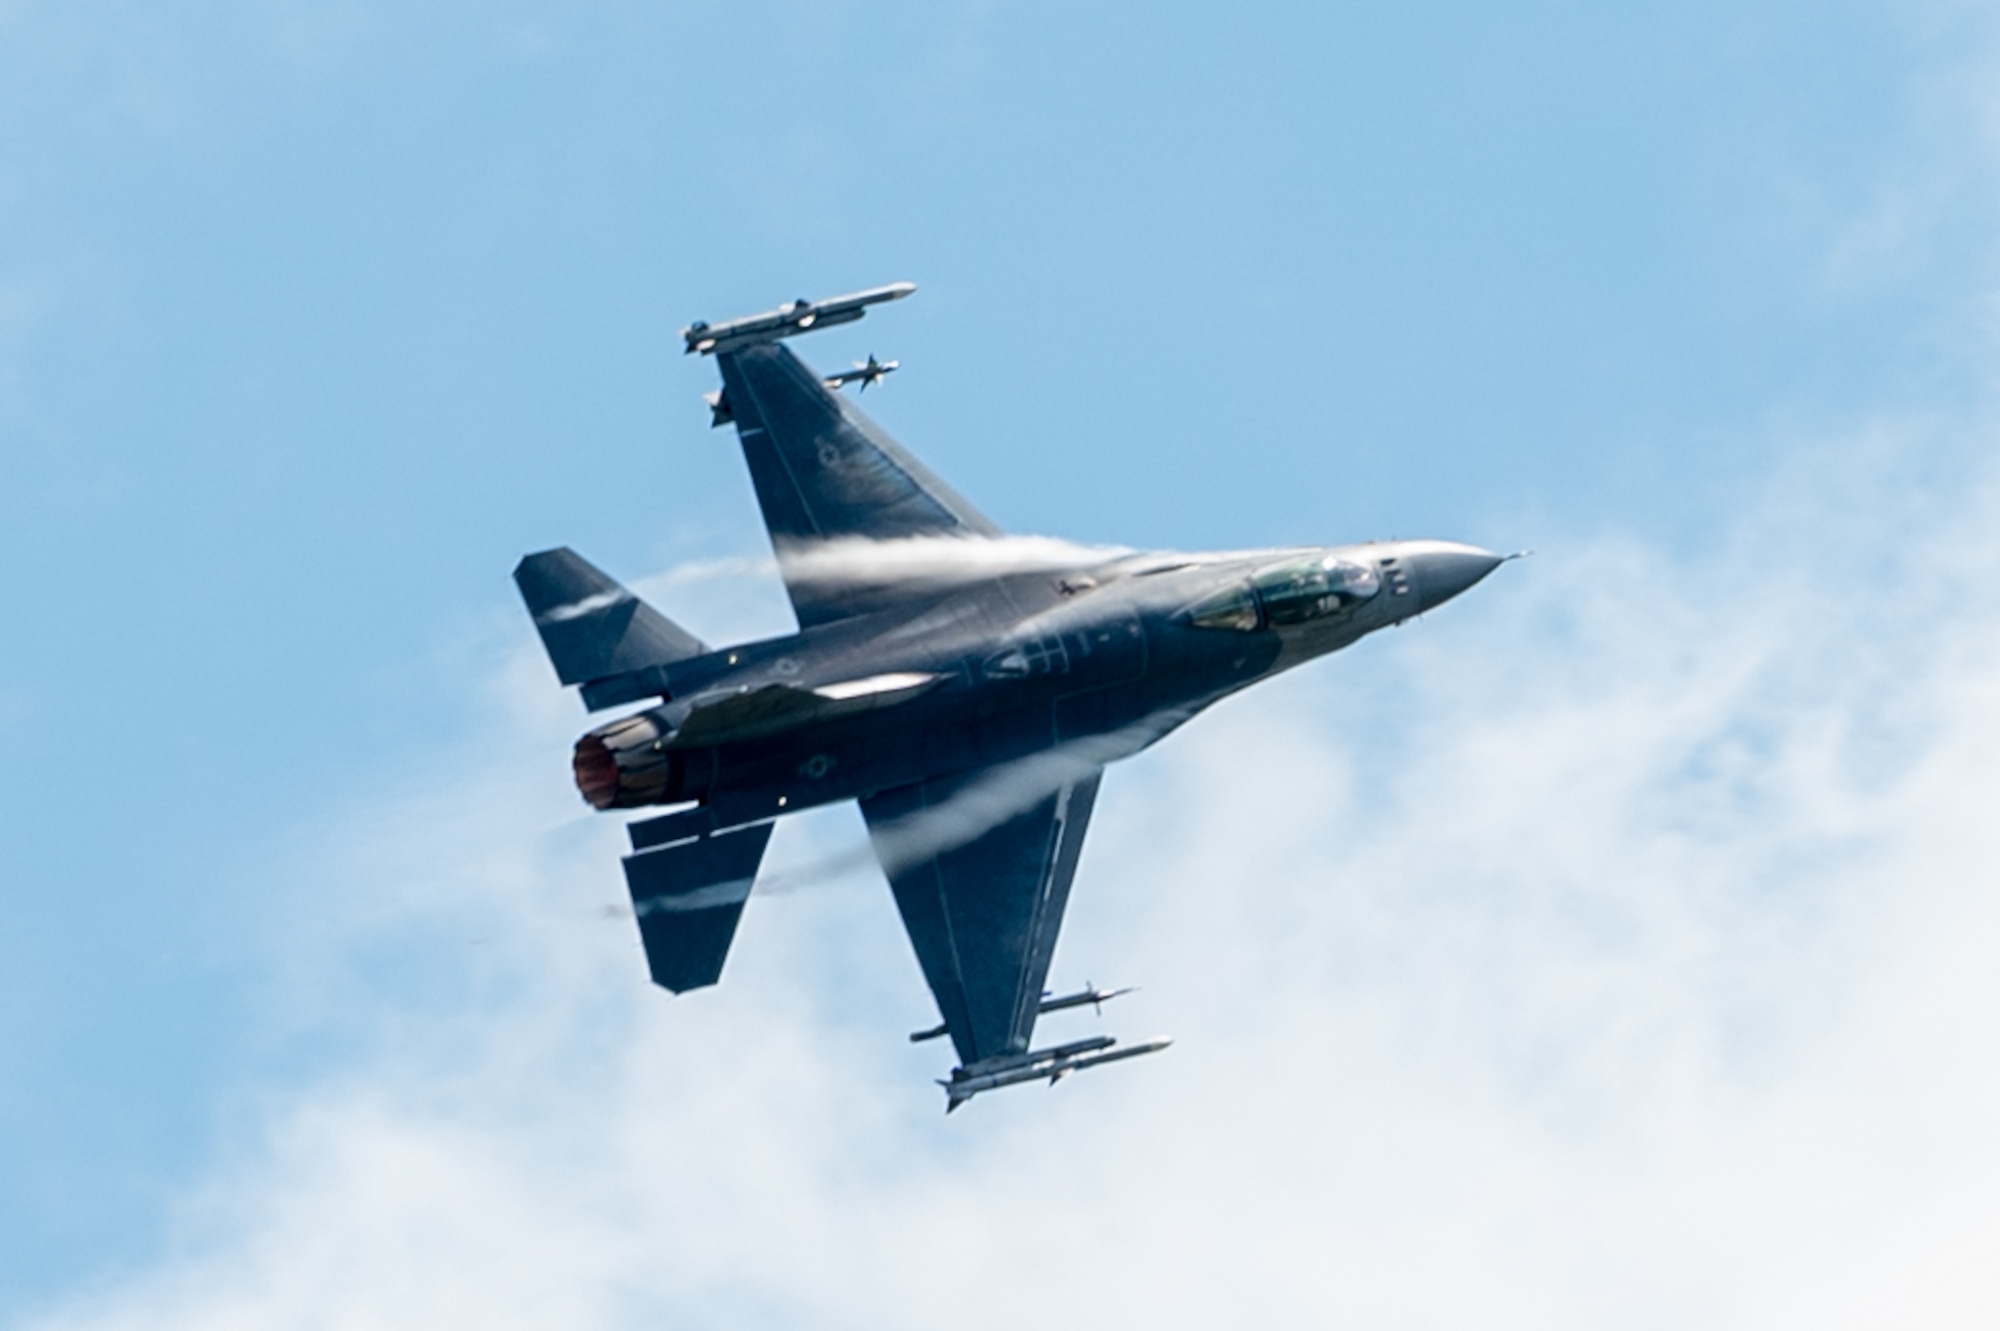 An estimated 140,000 people attended the Wings Over Homestead Air Show at Homestead Air Reserve Base, Florida, April 1 and 2, 2023. The U.S. Air Force Thunderbirds headlined the two-day event, which featured several other military and civilian air acts.